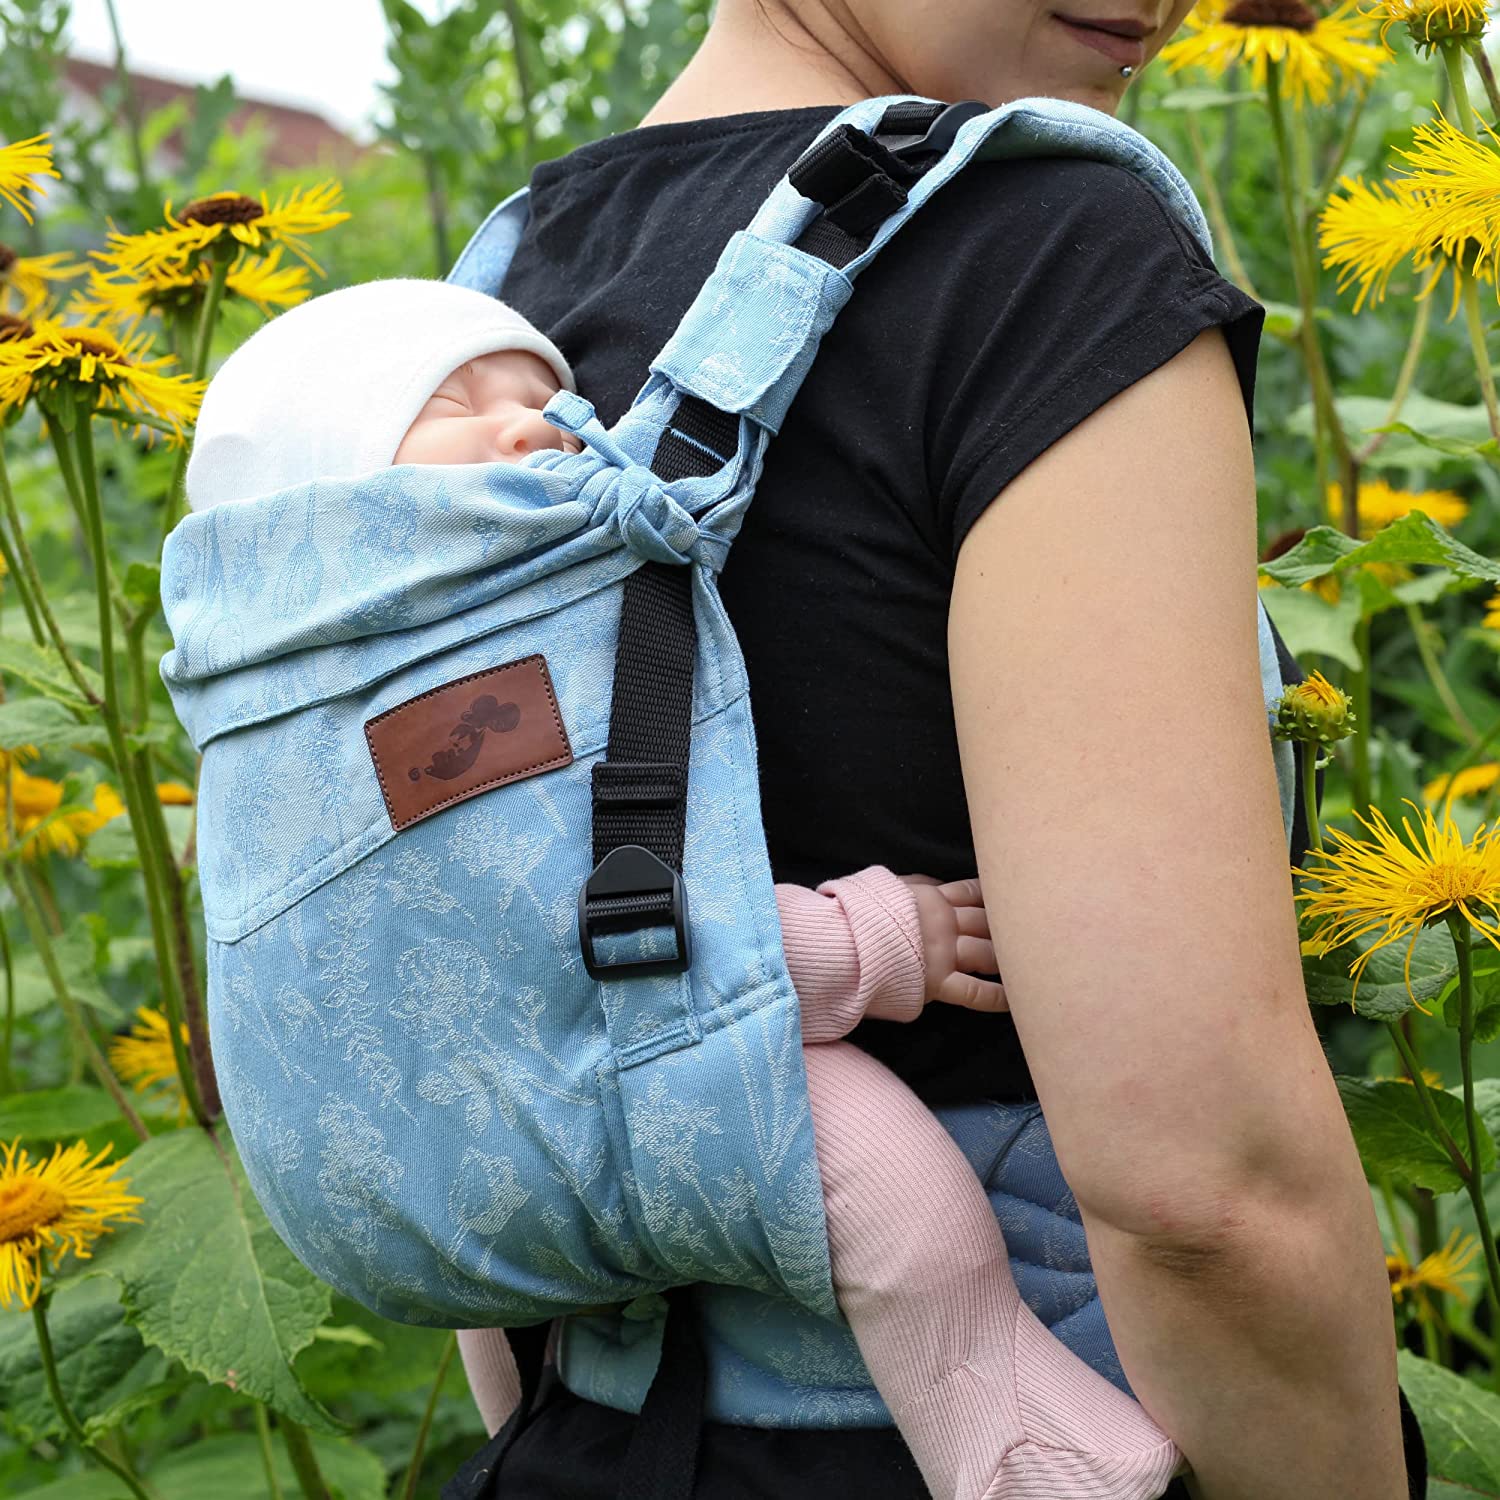 Schmusewolke Comfort FullBuckle - Baby Carrier for Newborns from Birth (0-12 Months, 3-12 kg) - Organic Cotton with Linen - Fleur Provence